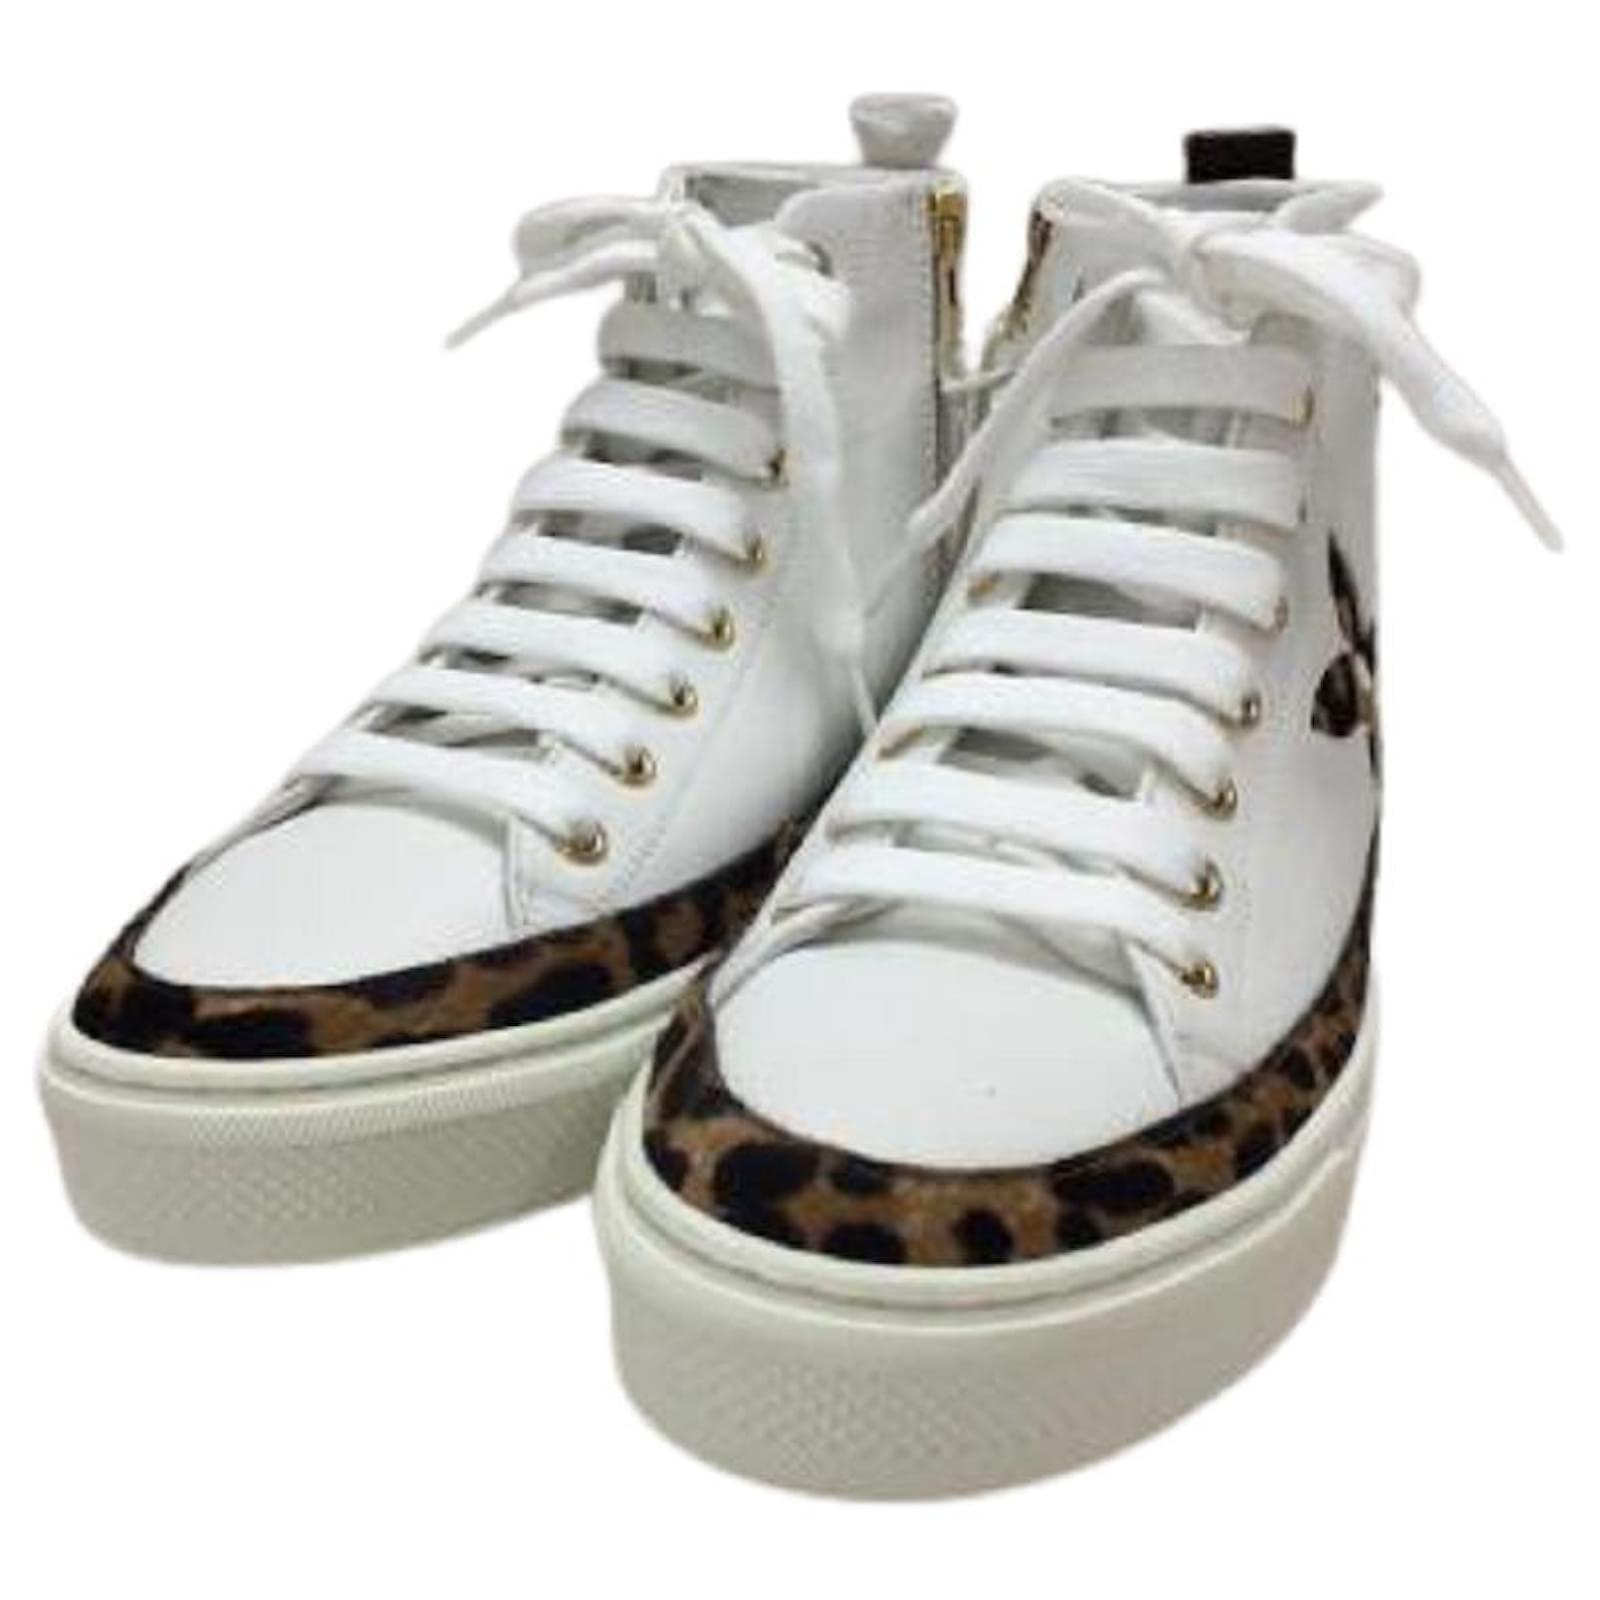 Chaussures Sneakers Louis Vuitton Blanc d'occasion